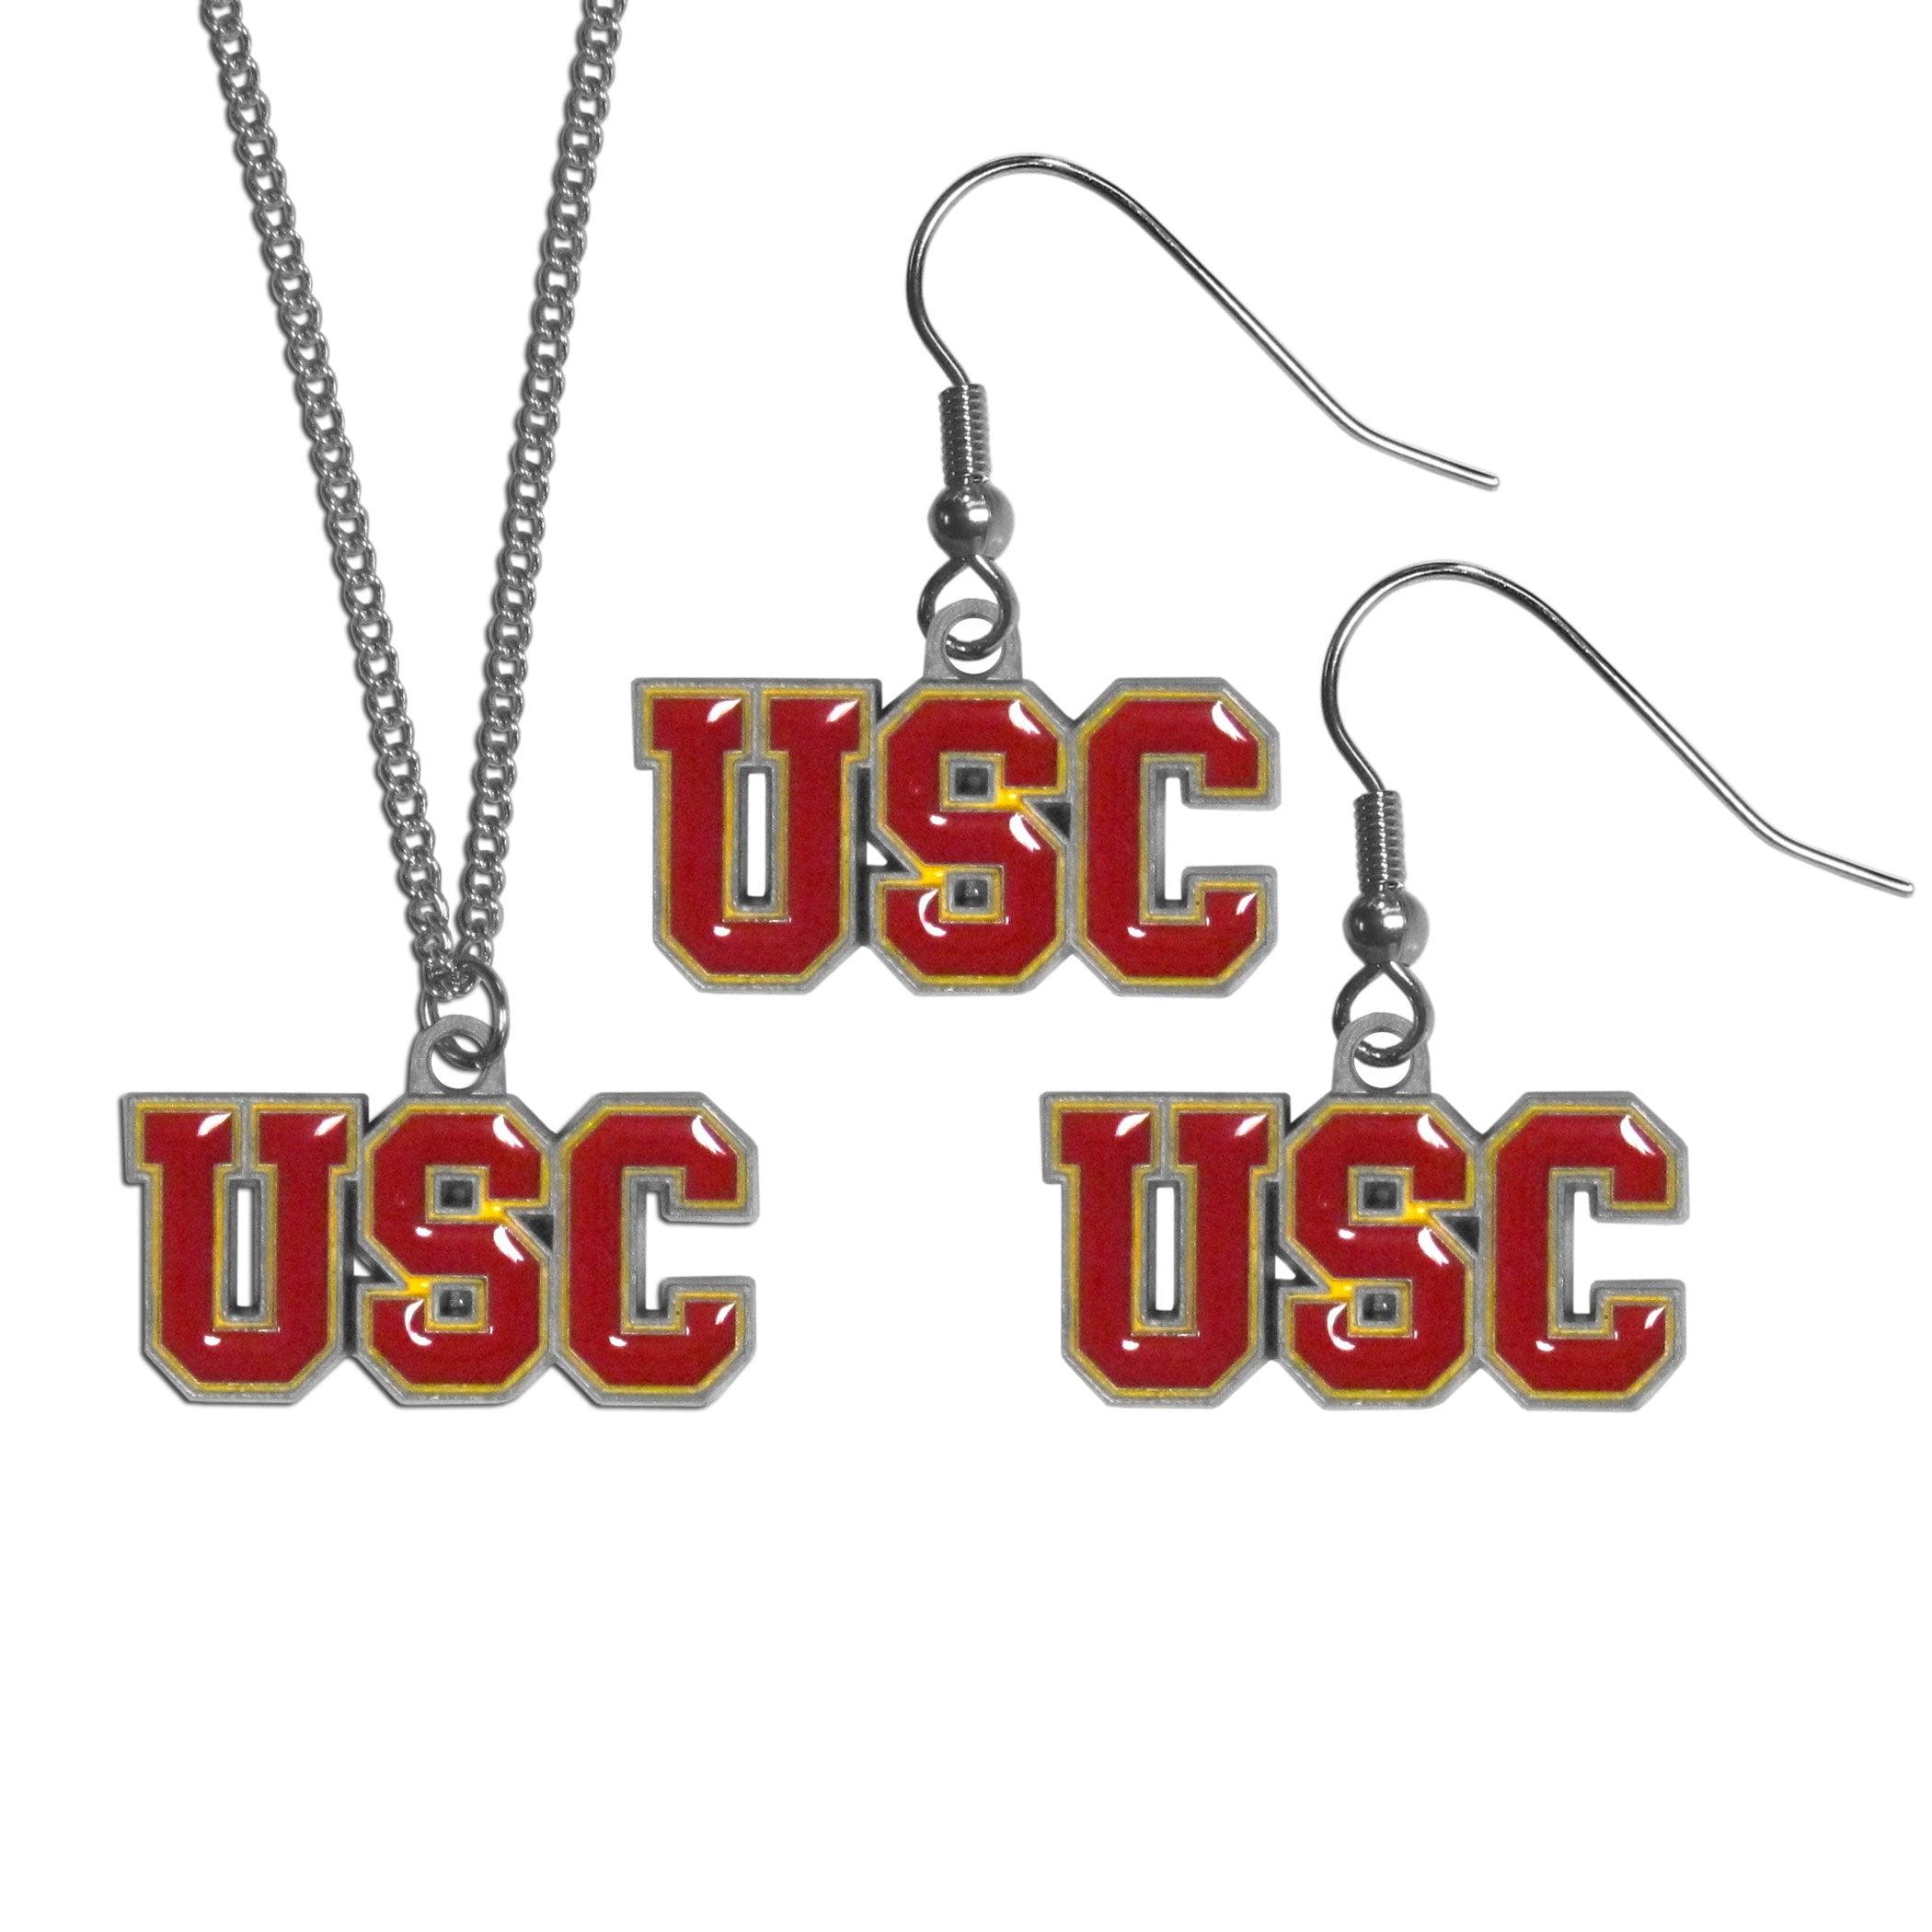 USC Trojans Dangle Earrings and Chain Necklace Set - Flyclothing LLC